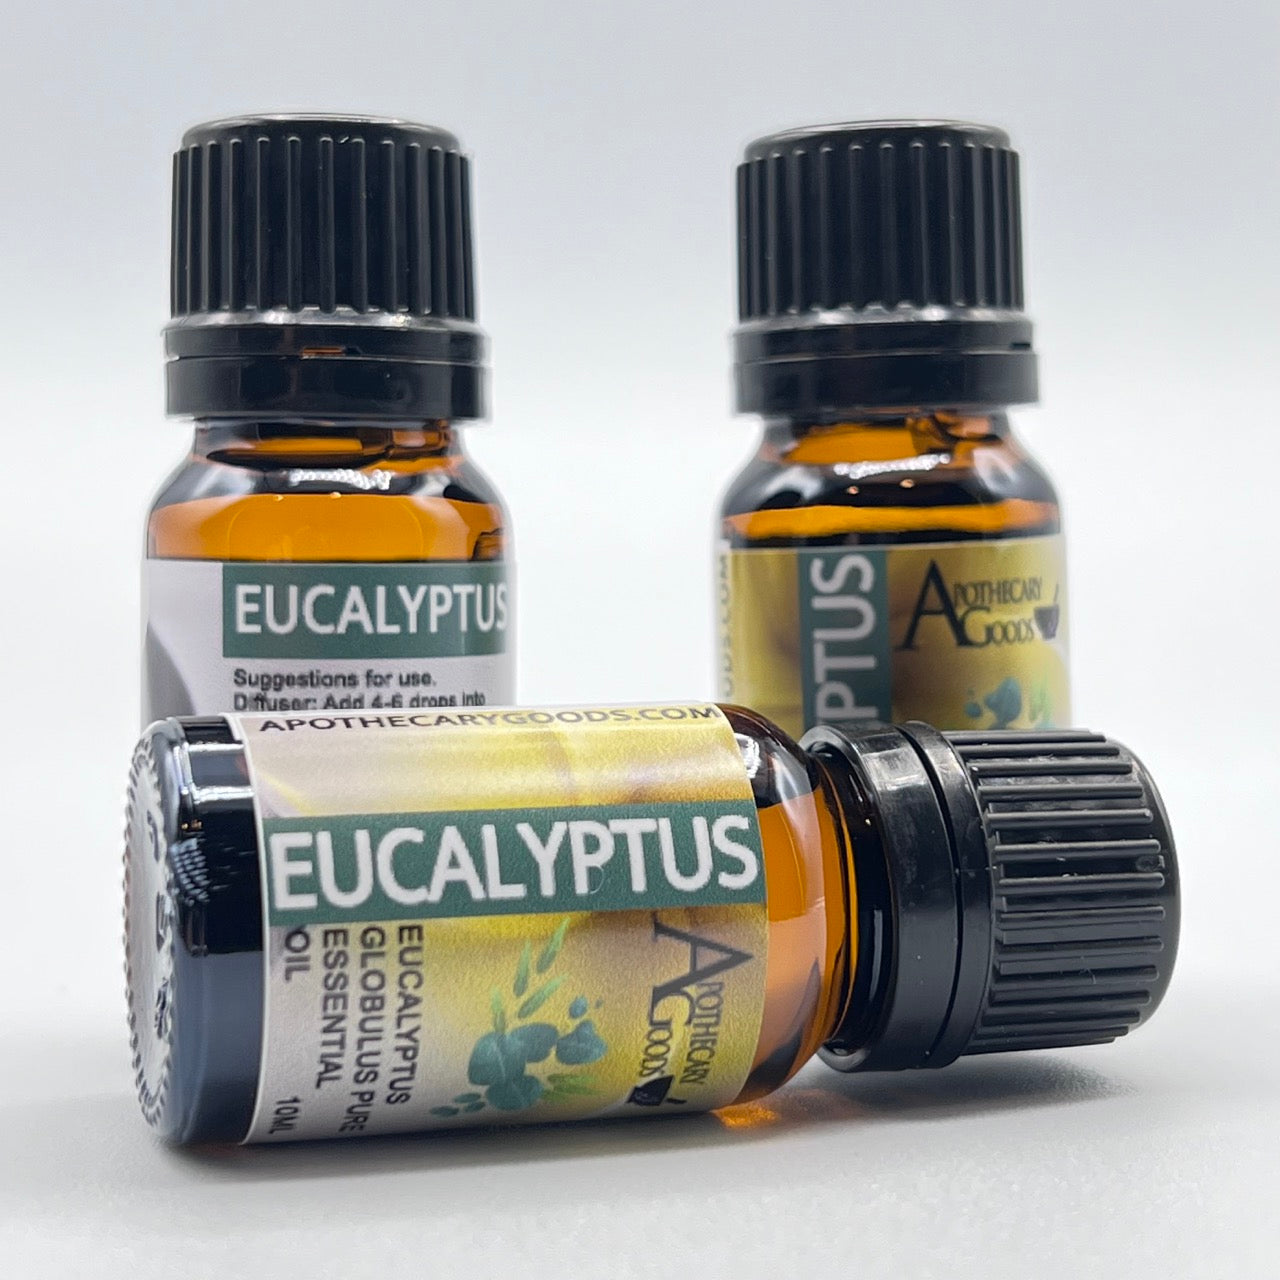 Eucalyptus Oil Benefits and Uses - Compare 4 Different Varieties – Morgans  Apothecary